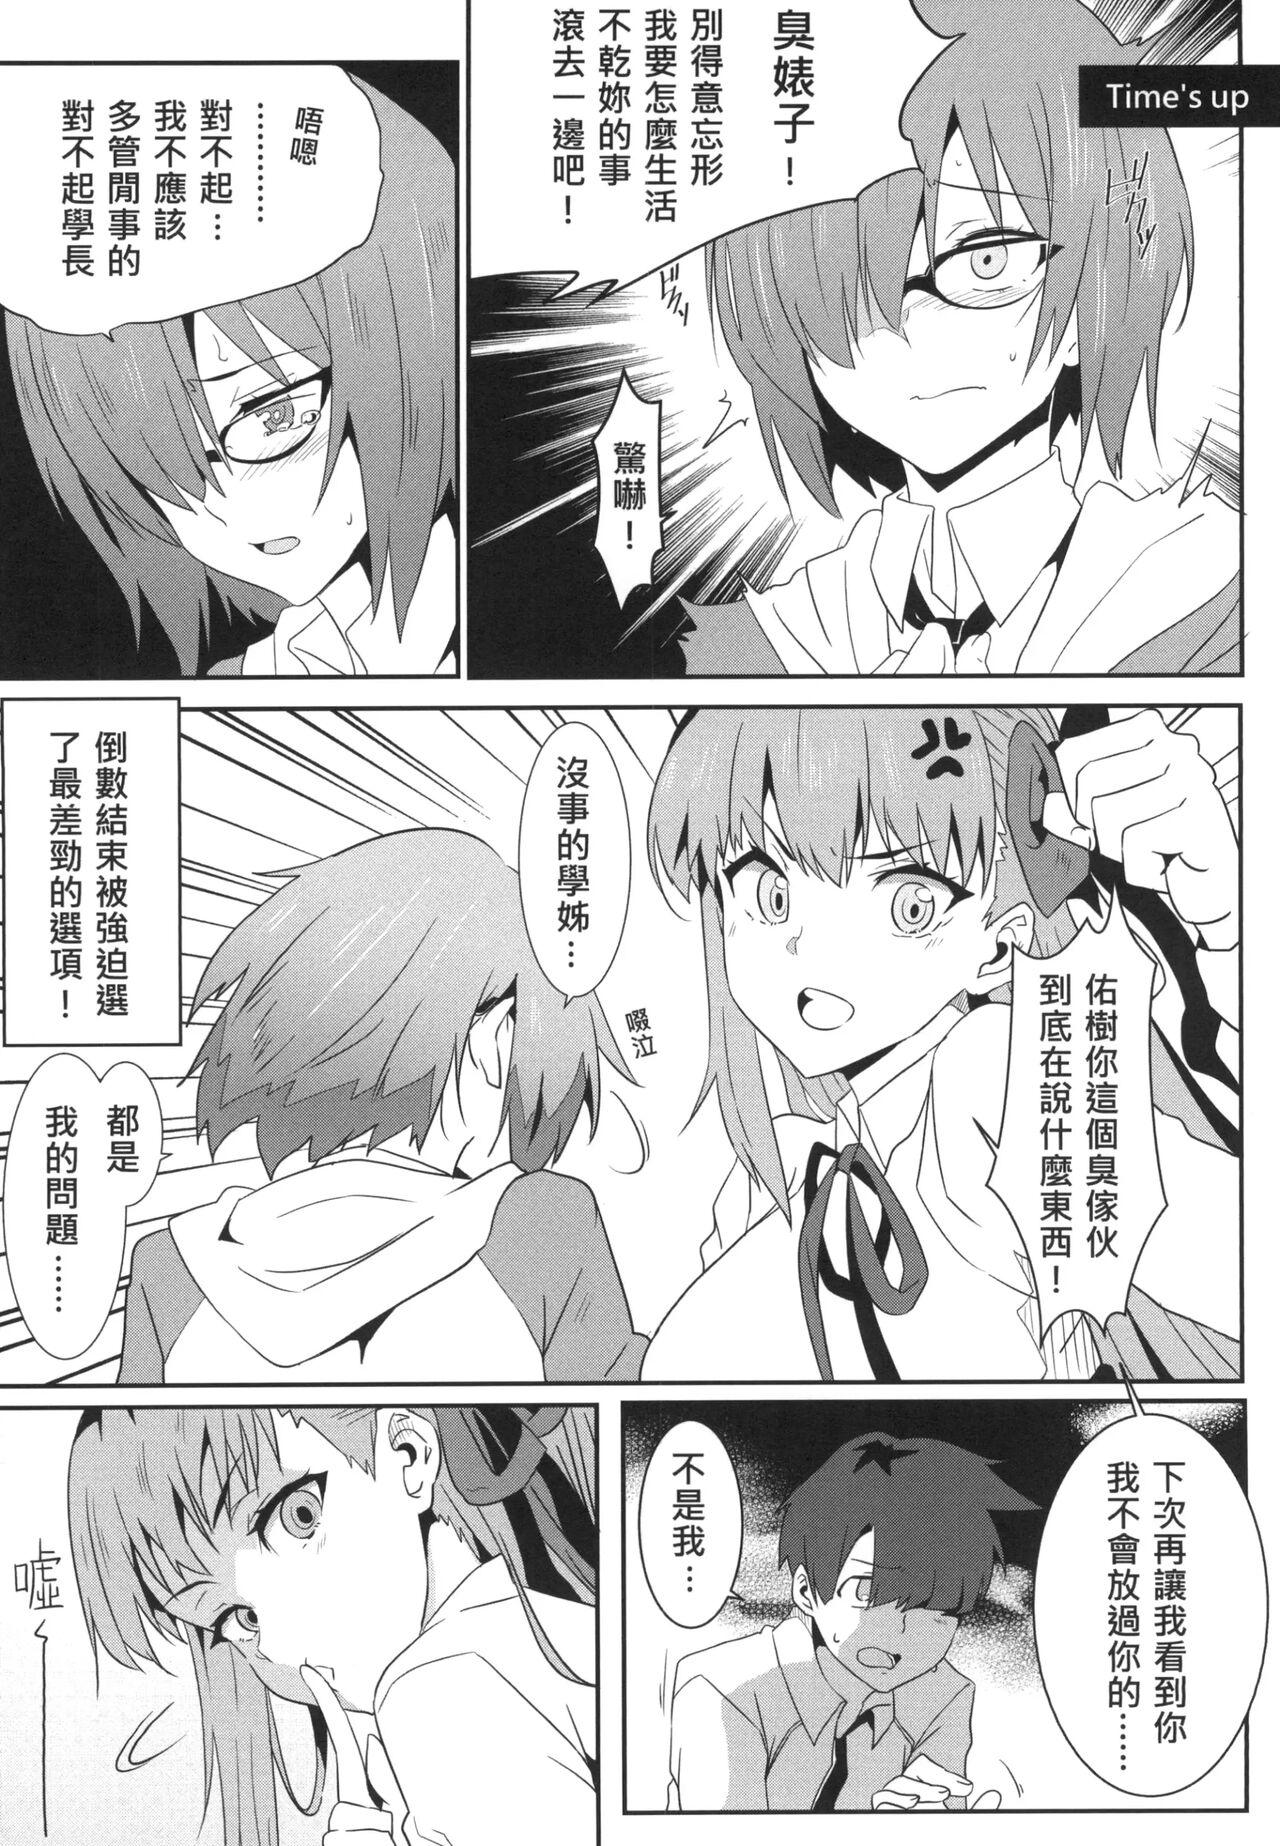 Soloboy FFFF.Go Fortune Sugoroku - Fate grand order Best Blowjob - Page 8